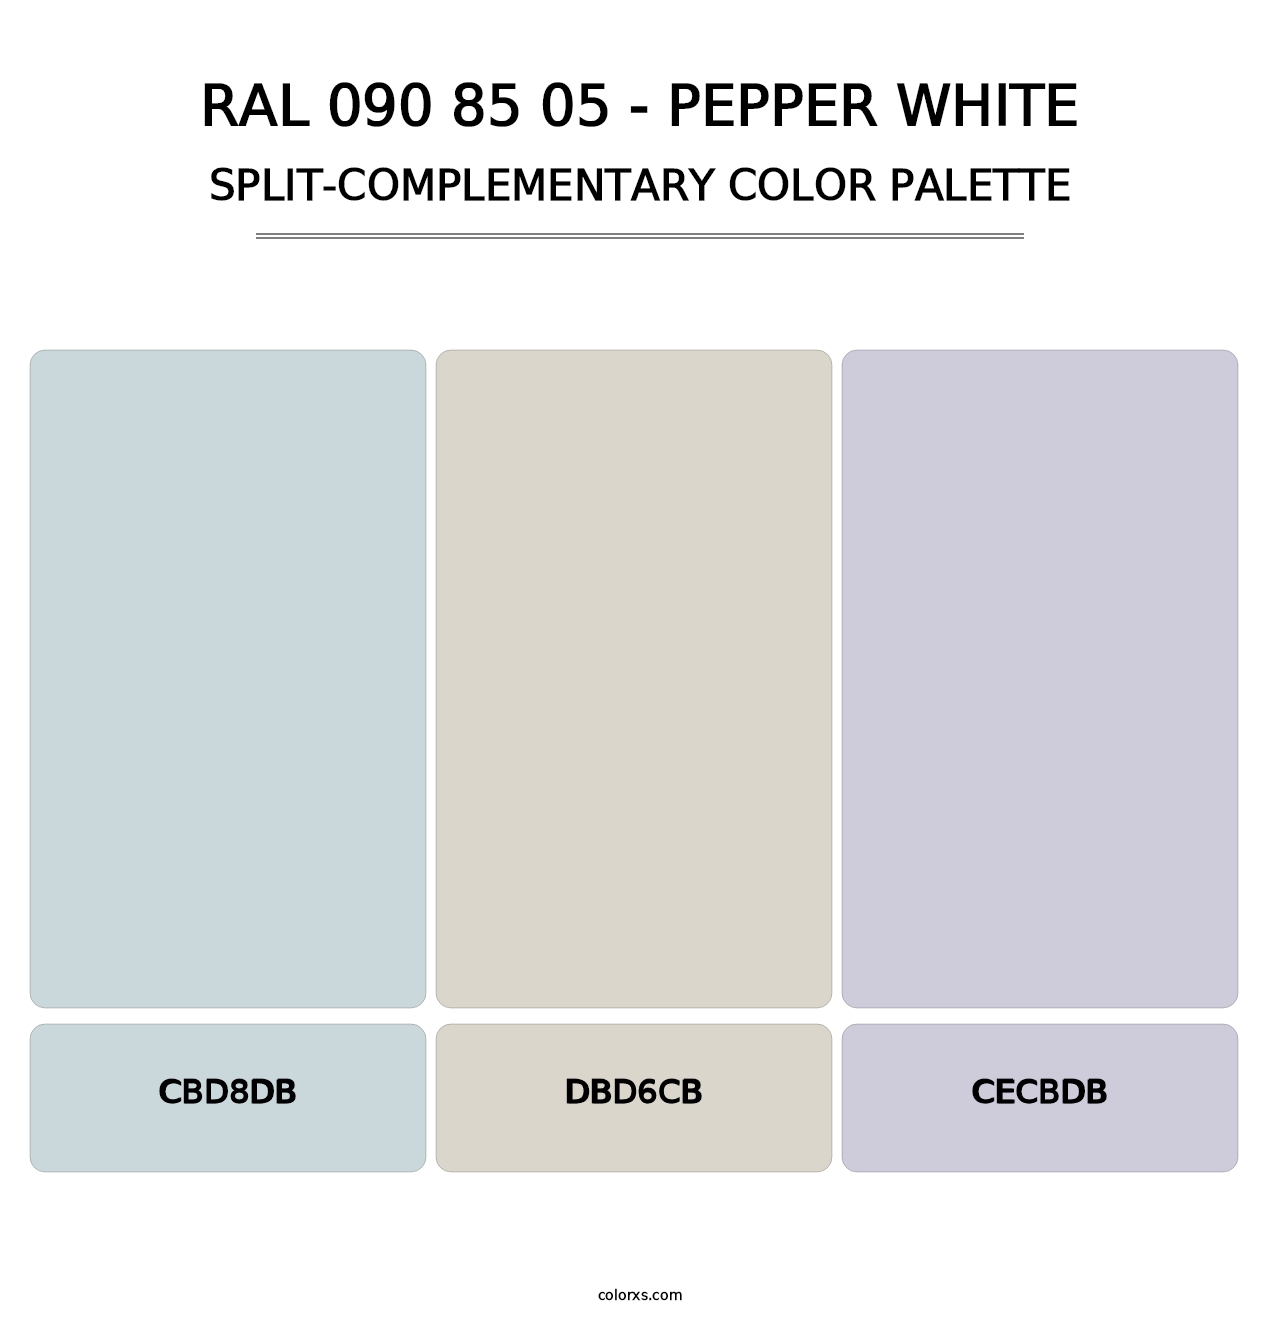 RAL 090 85 05 - Pepper White - Split-Complementary Color Palette